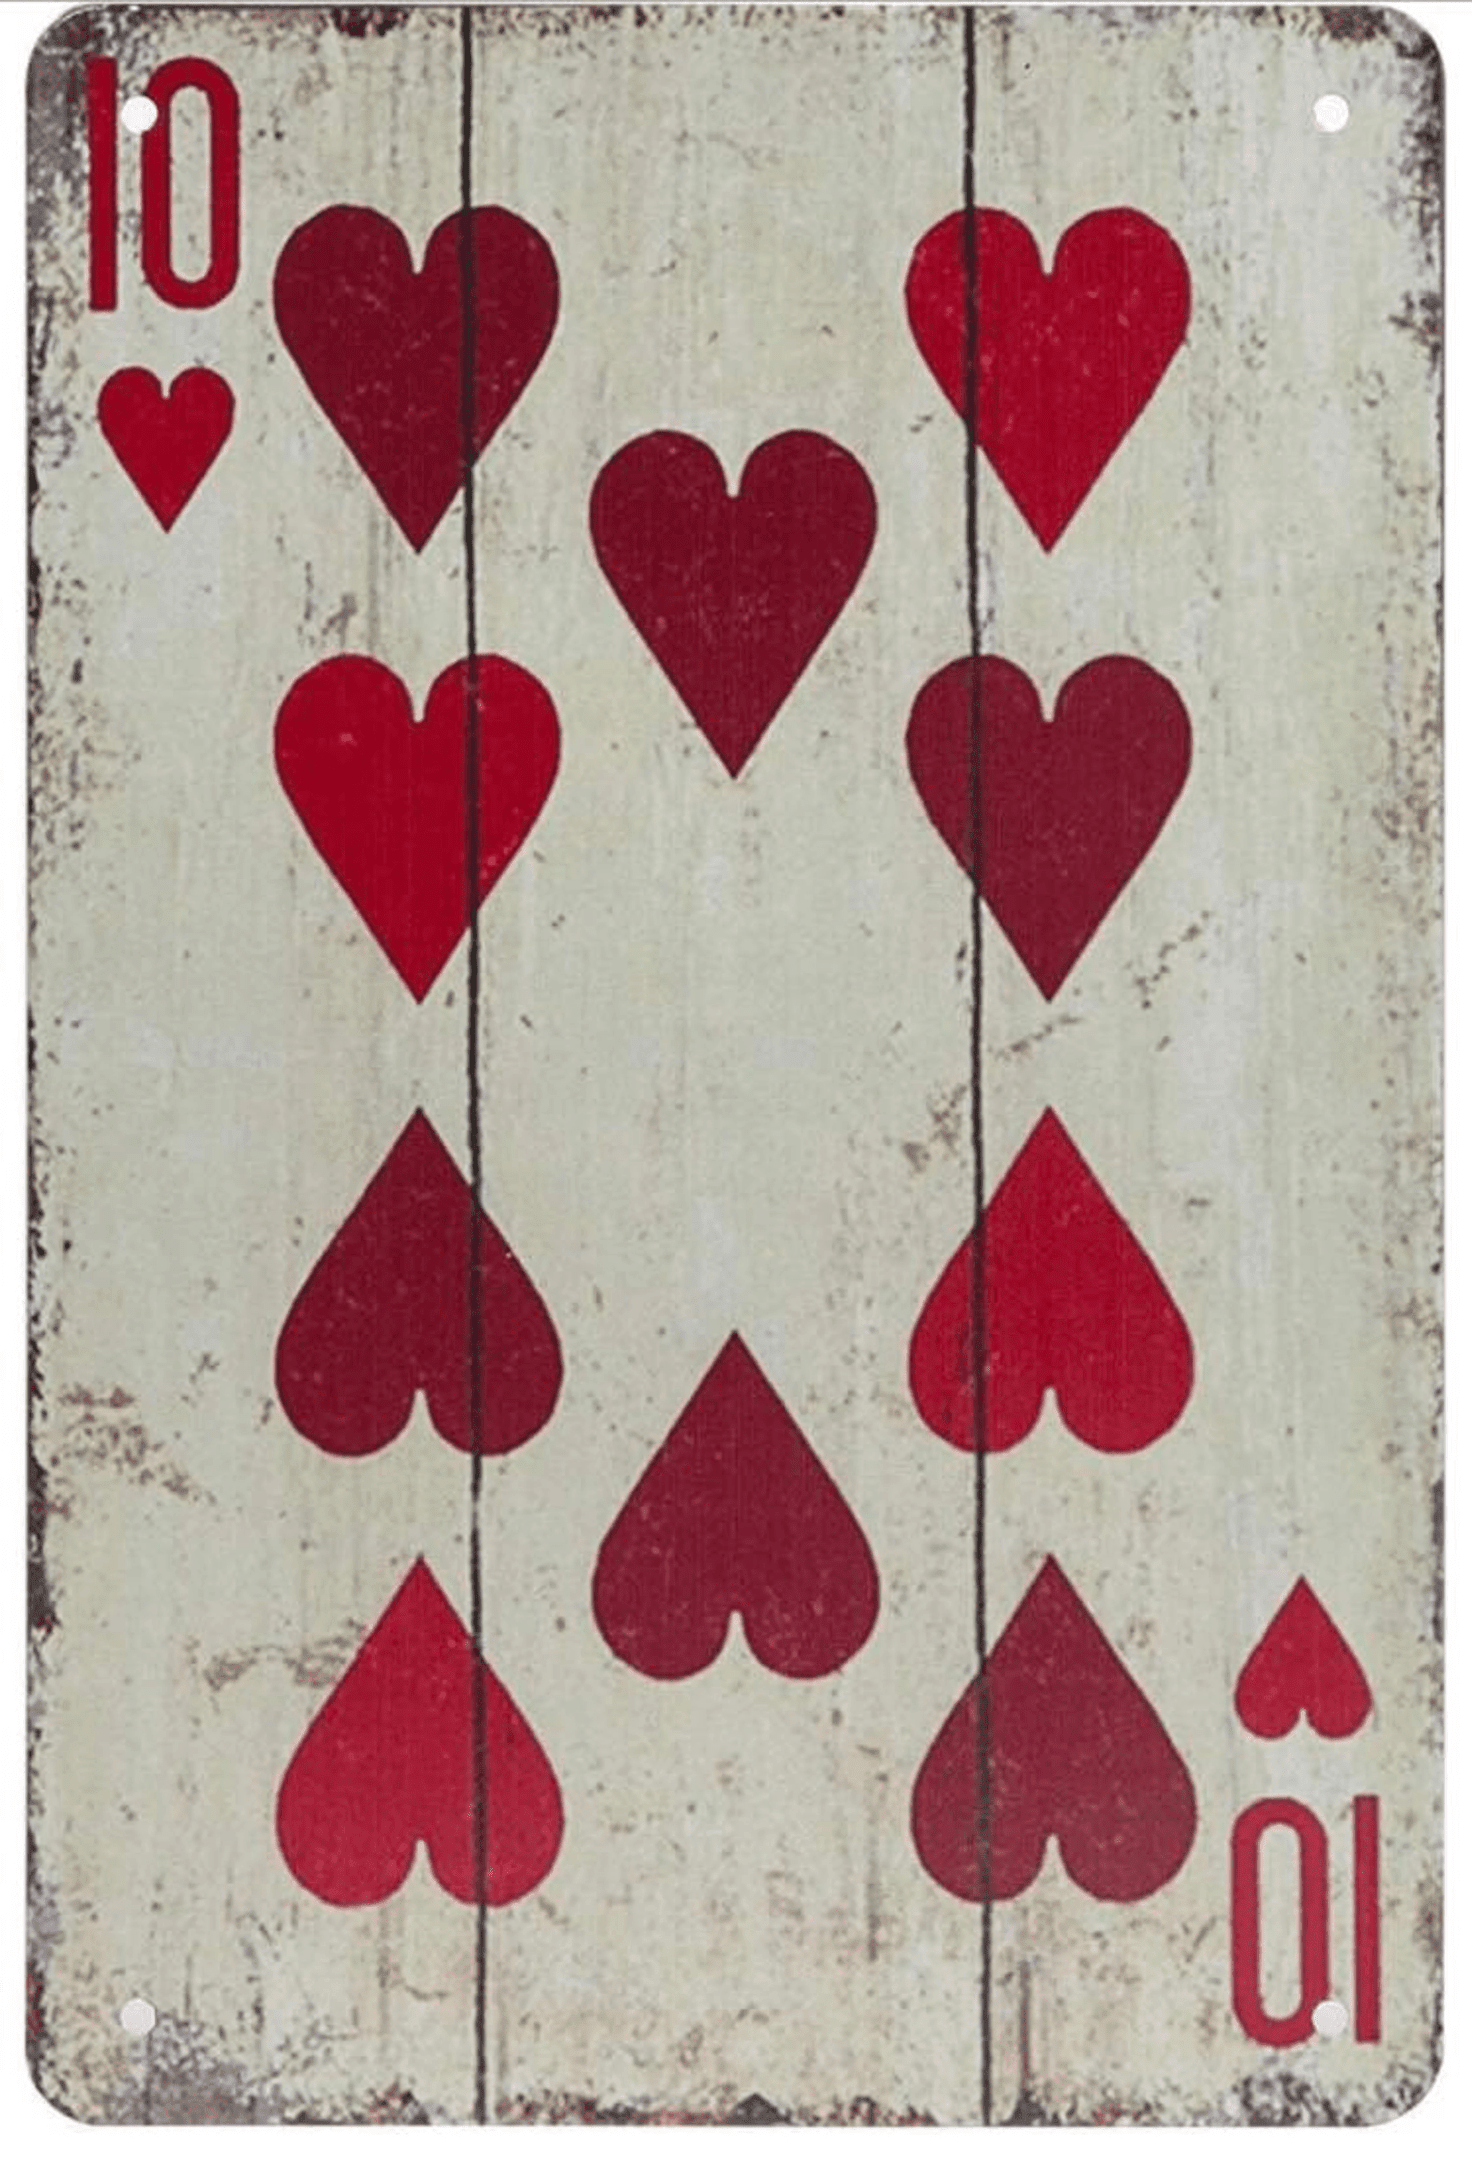 Retro Metal Tin Sign | Poker Cart 10 of Hearts Metal Sign | Retro Poker Tin Wall Poster | Man Cave Plaque | Wall Decor inches